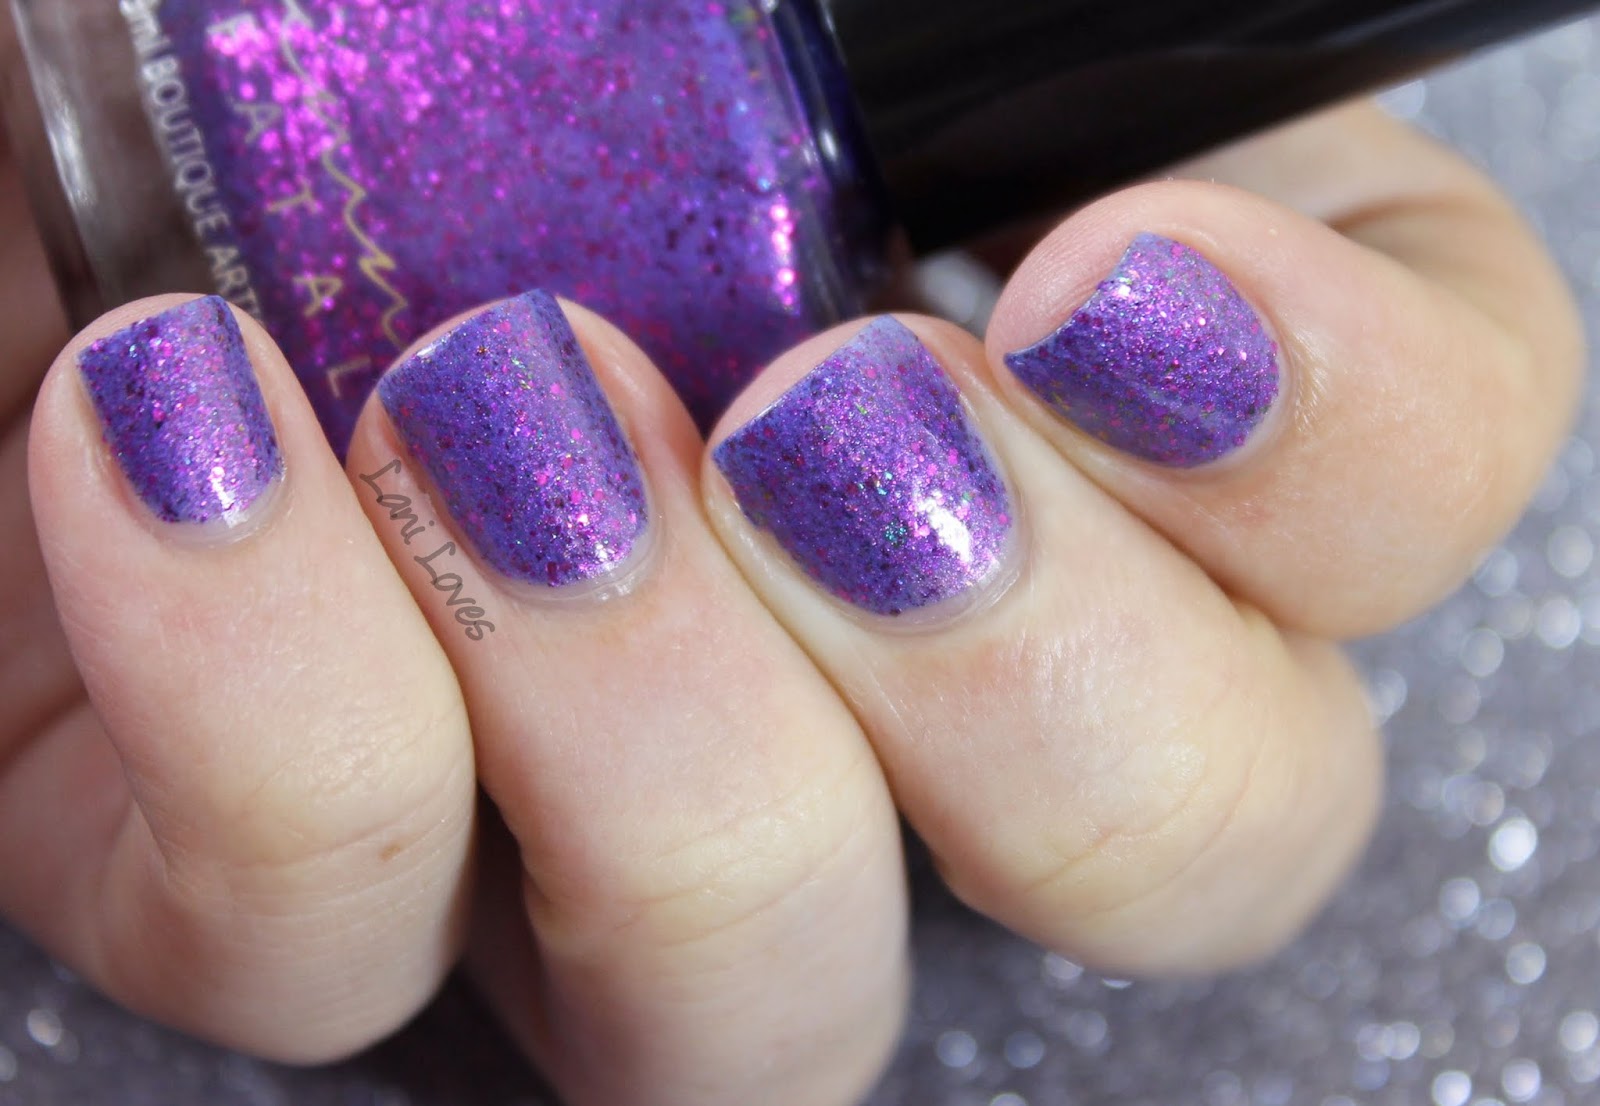 Femme Fatale Cosmetics - Bodice Lace nail polish swatches & review